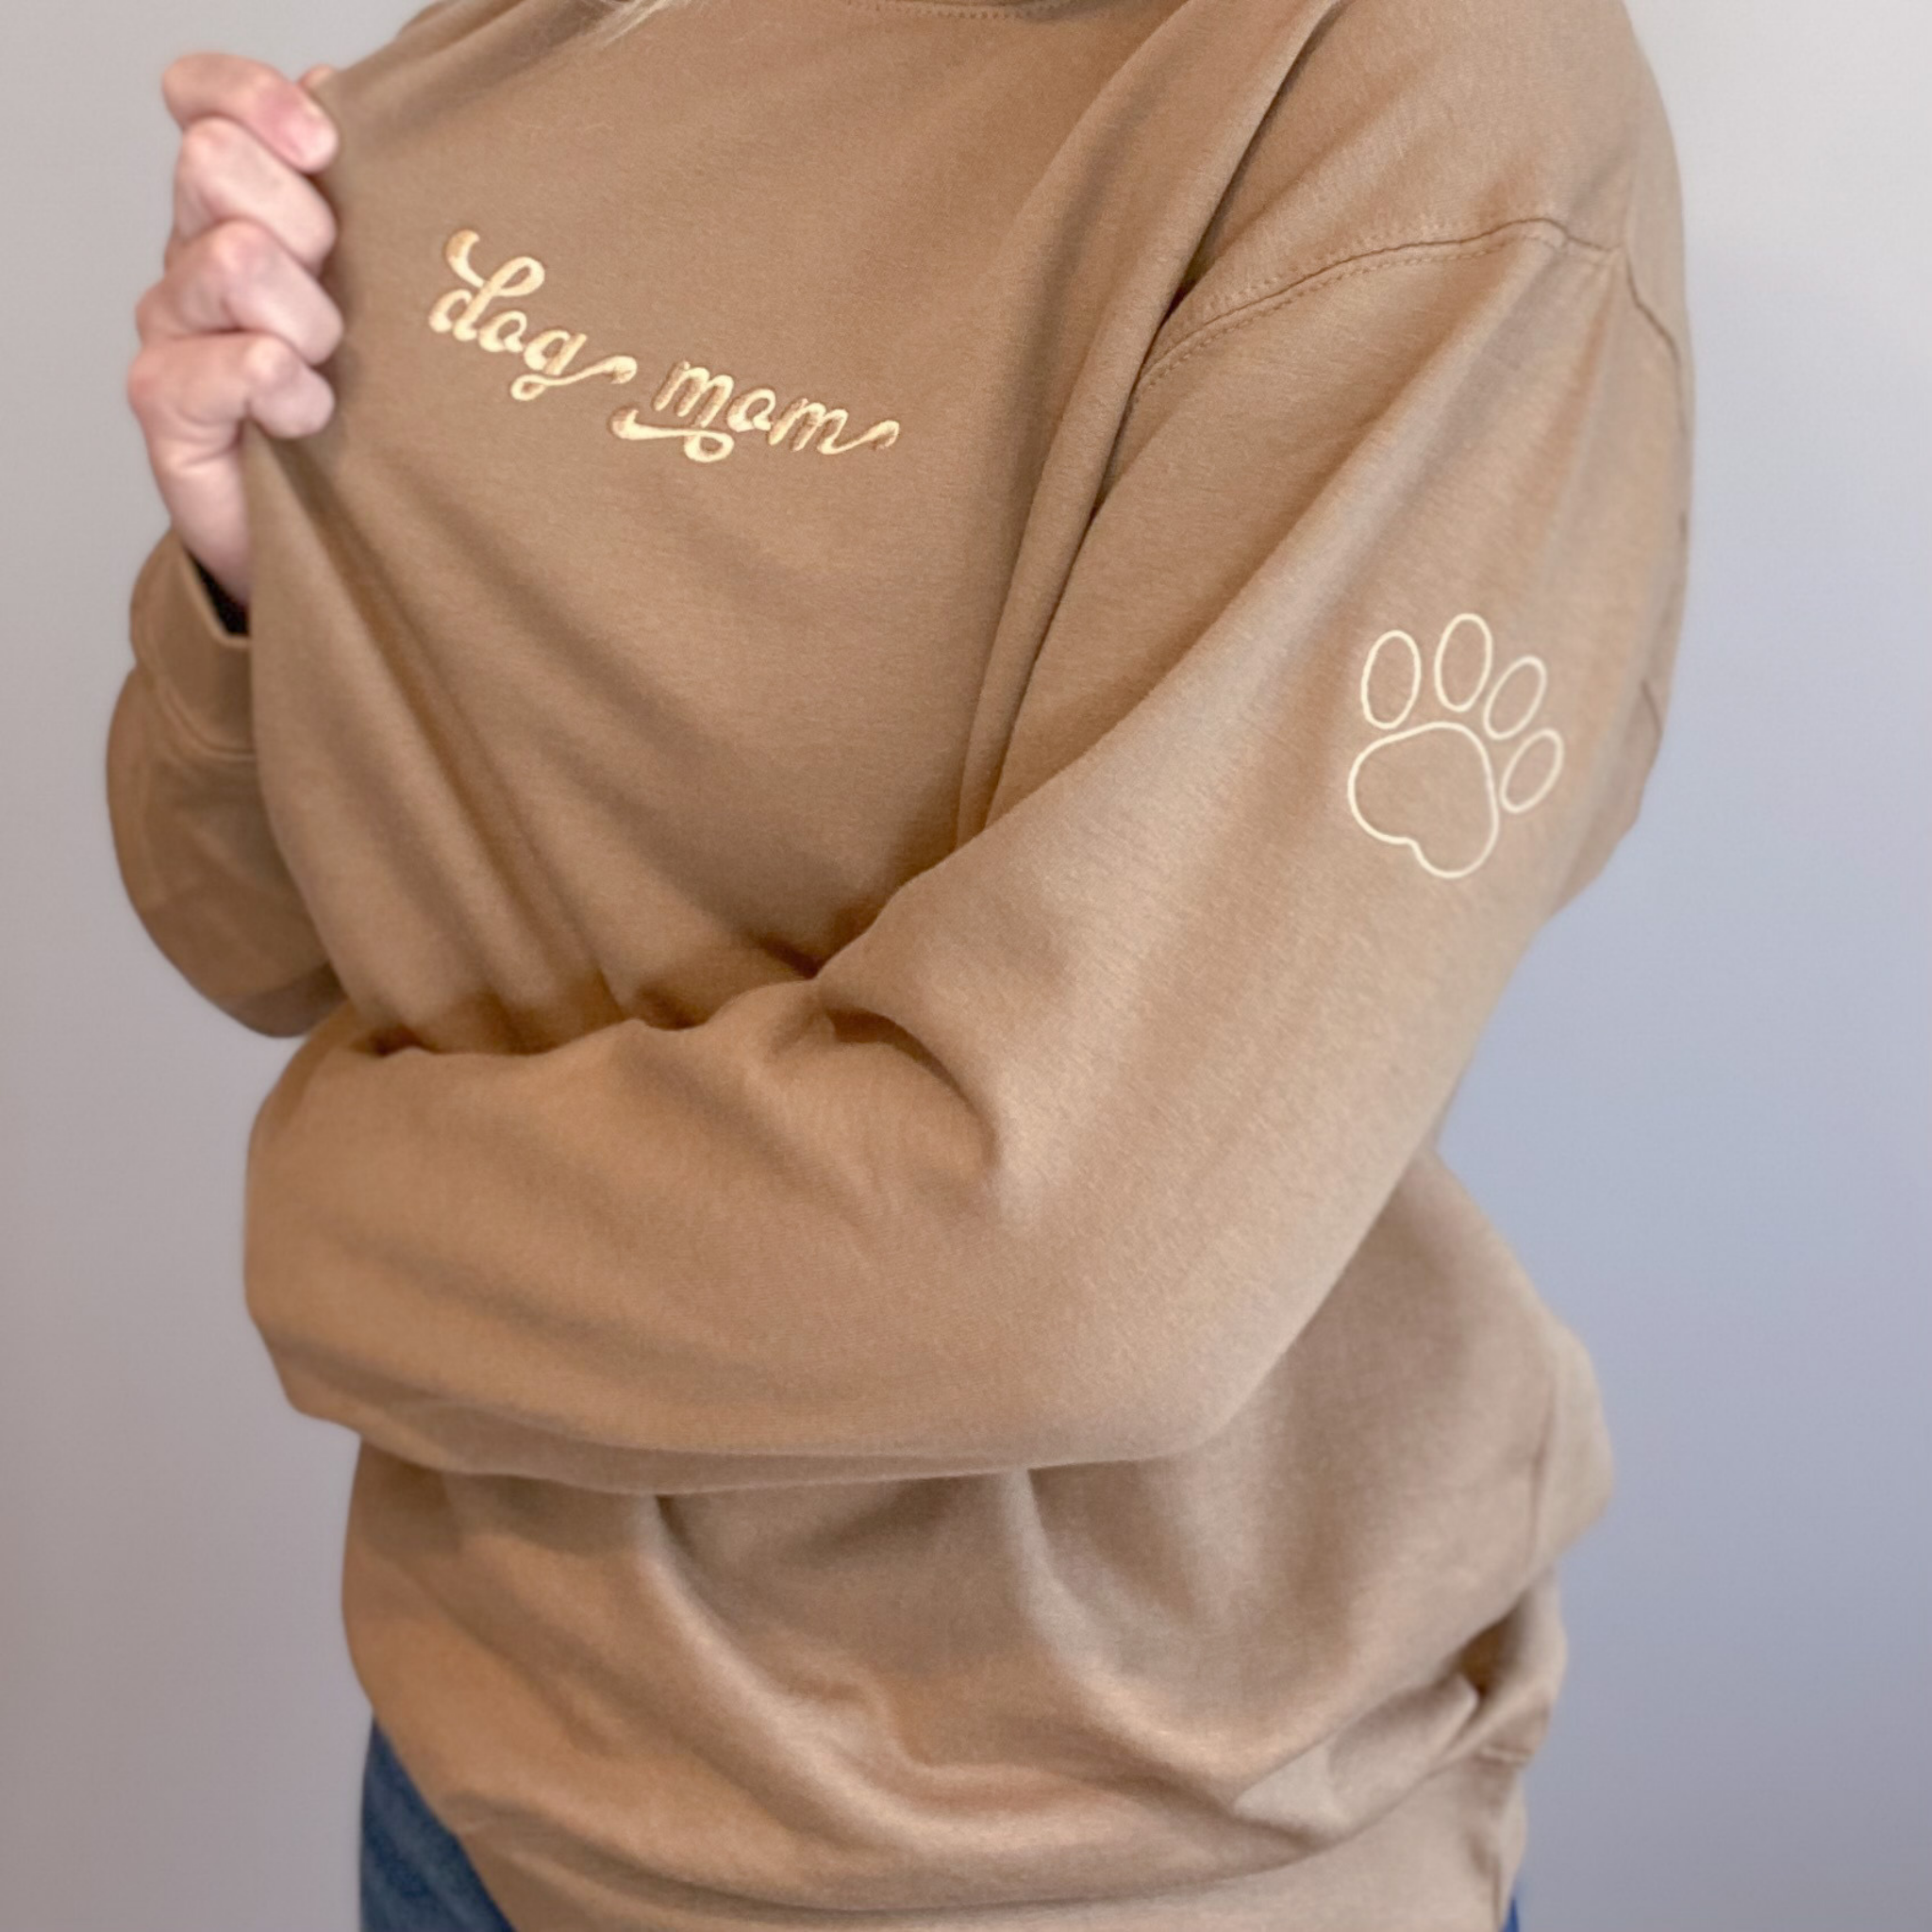 Tan crewneck with dog mom embroidered on the chest and a small paw print embroidered on the sleeve